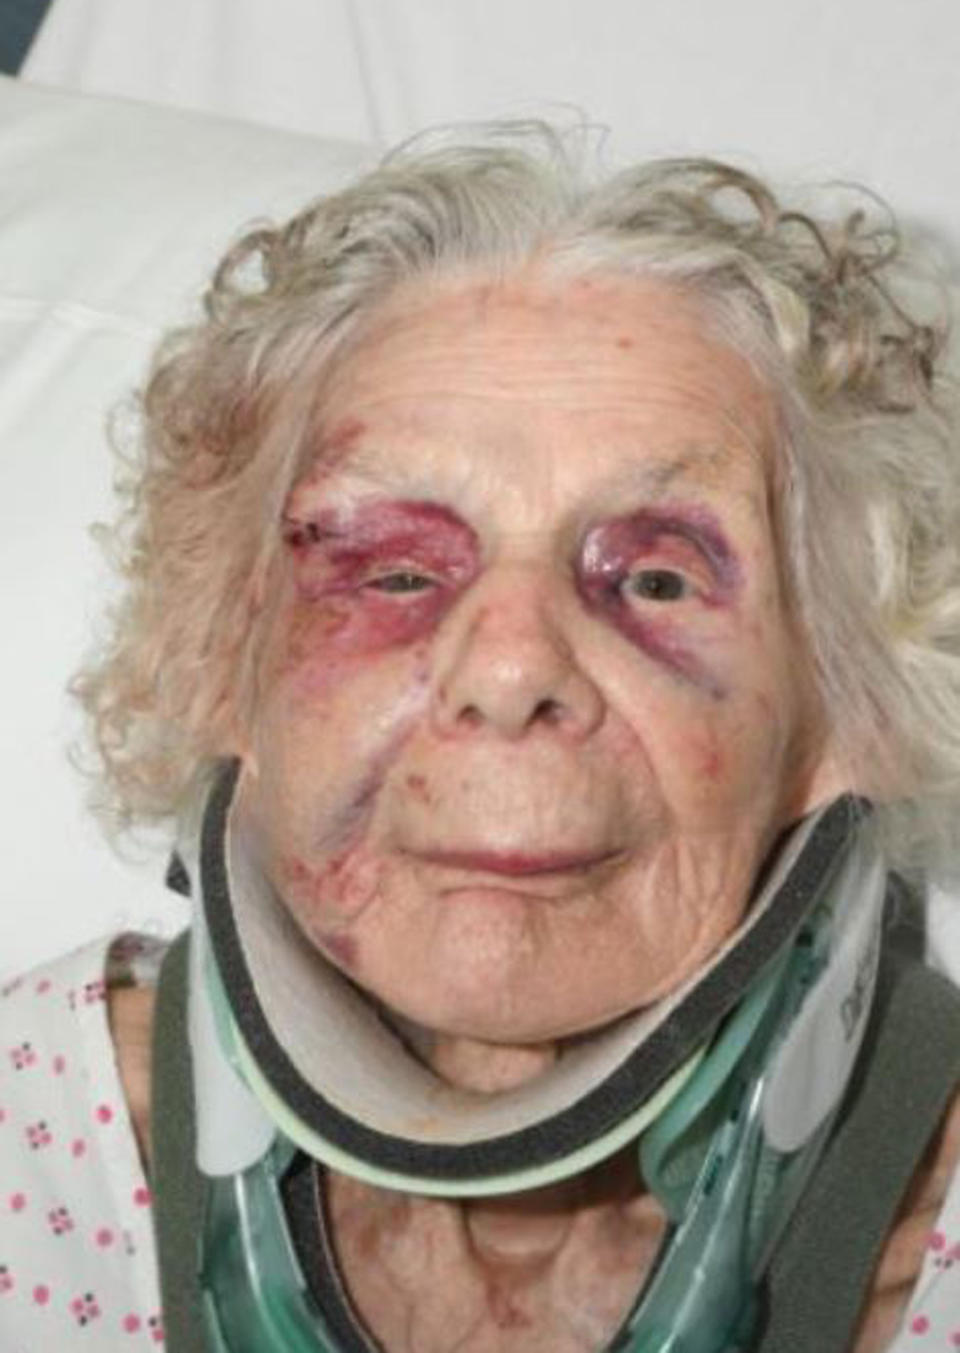 Zofija Kaczan suffered significant injuries after she was attacked in the street. Source: AAP